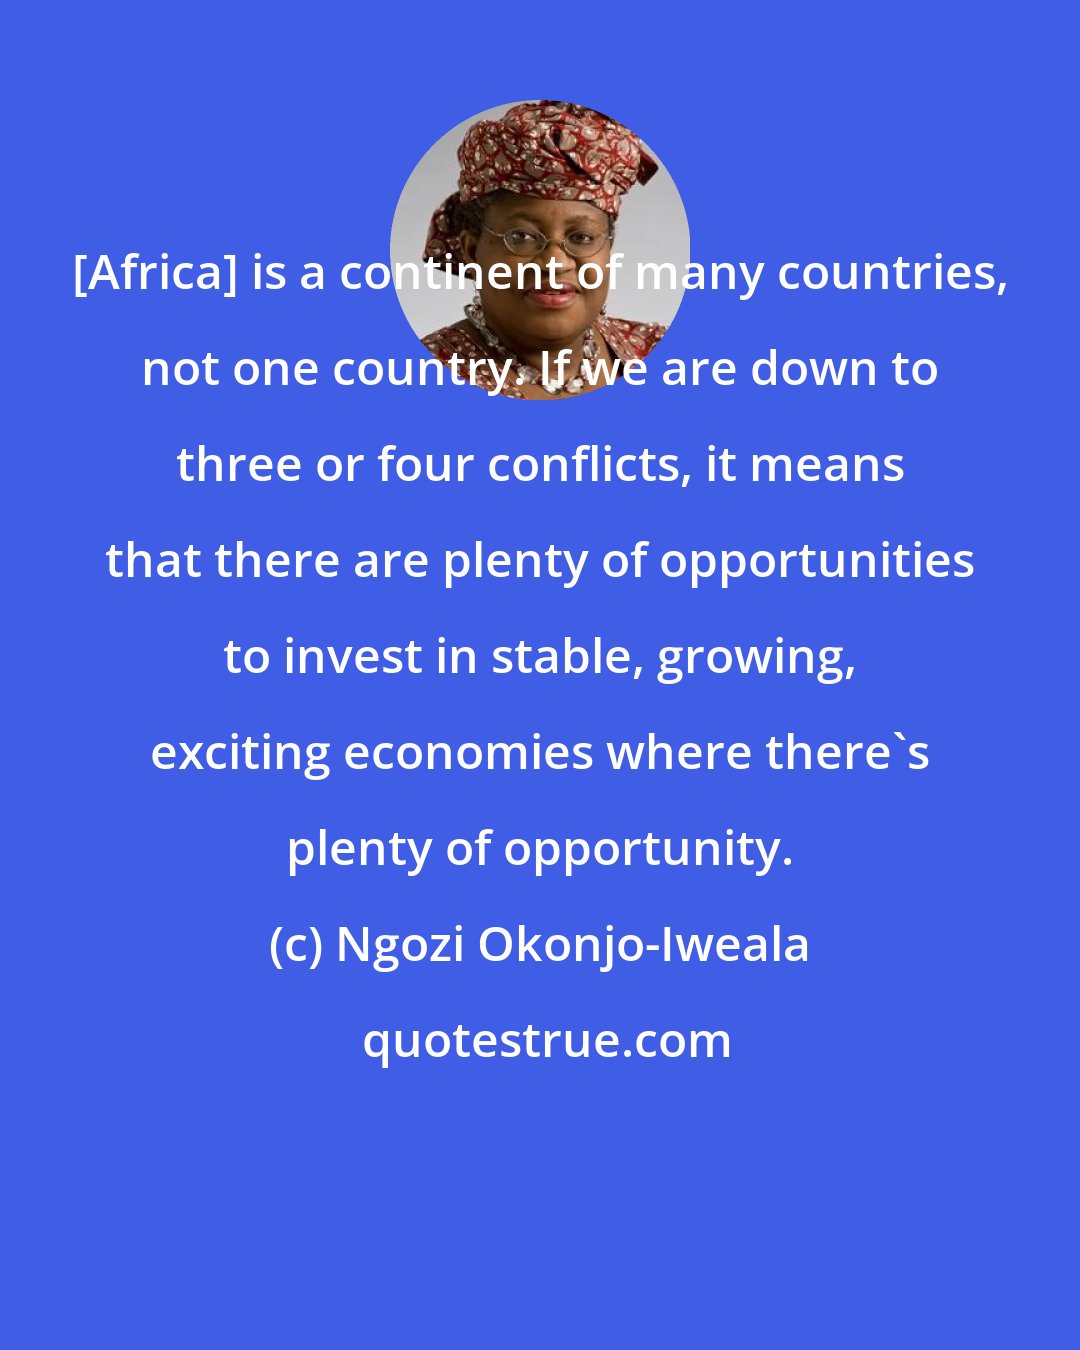 Ngozi Okonjo-Iweala: [Africa] is a continent of many countries, not one country. If we are down to three or four conflicts, it means that there are plenty of opportunities to invest in stable, growing, exciting economies where there's plenty of opportunity.